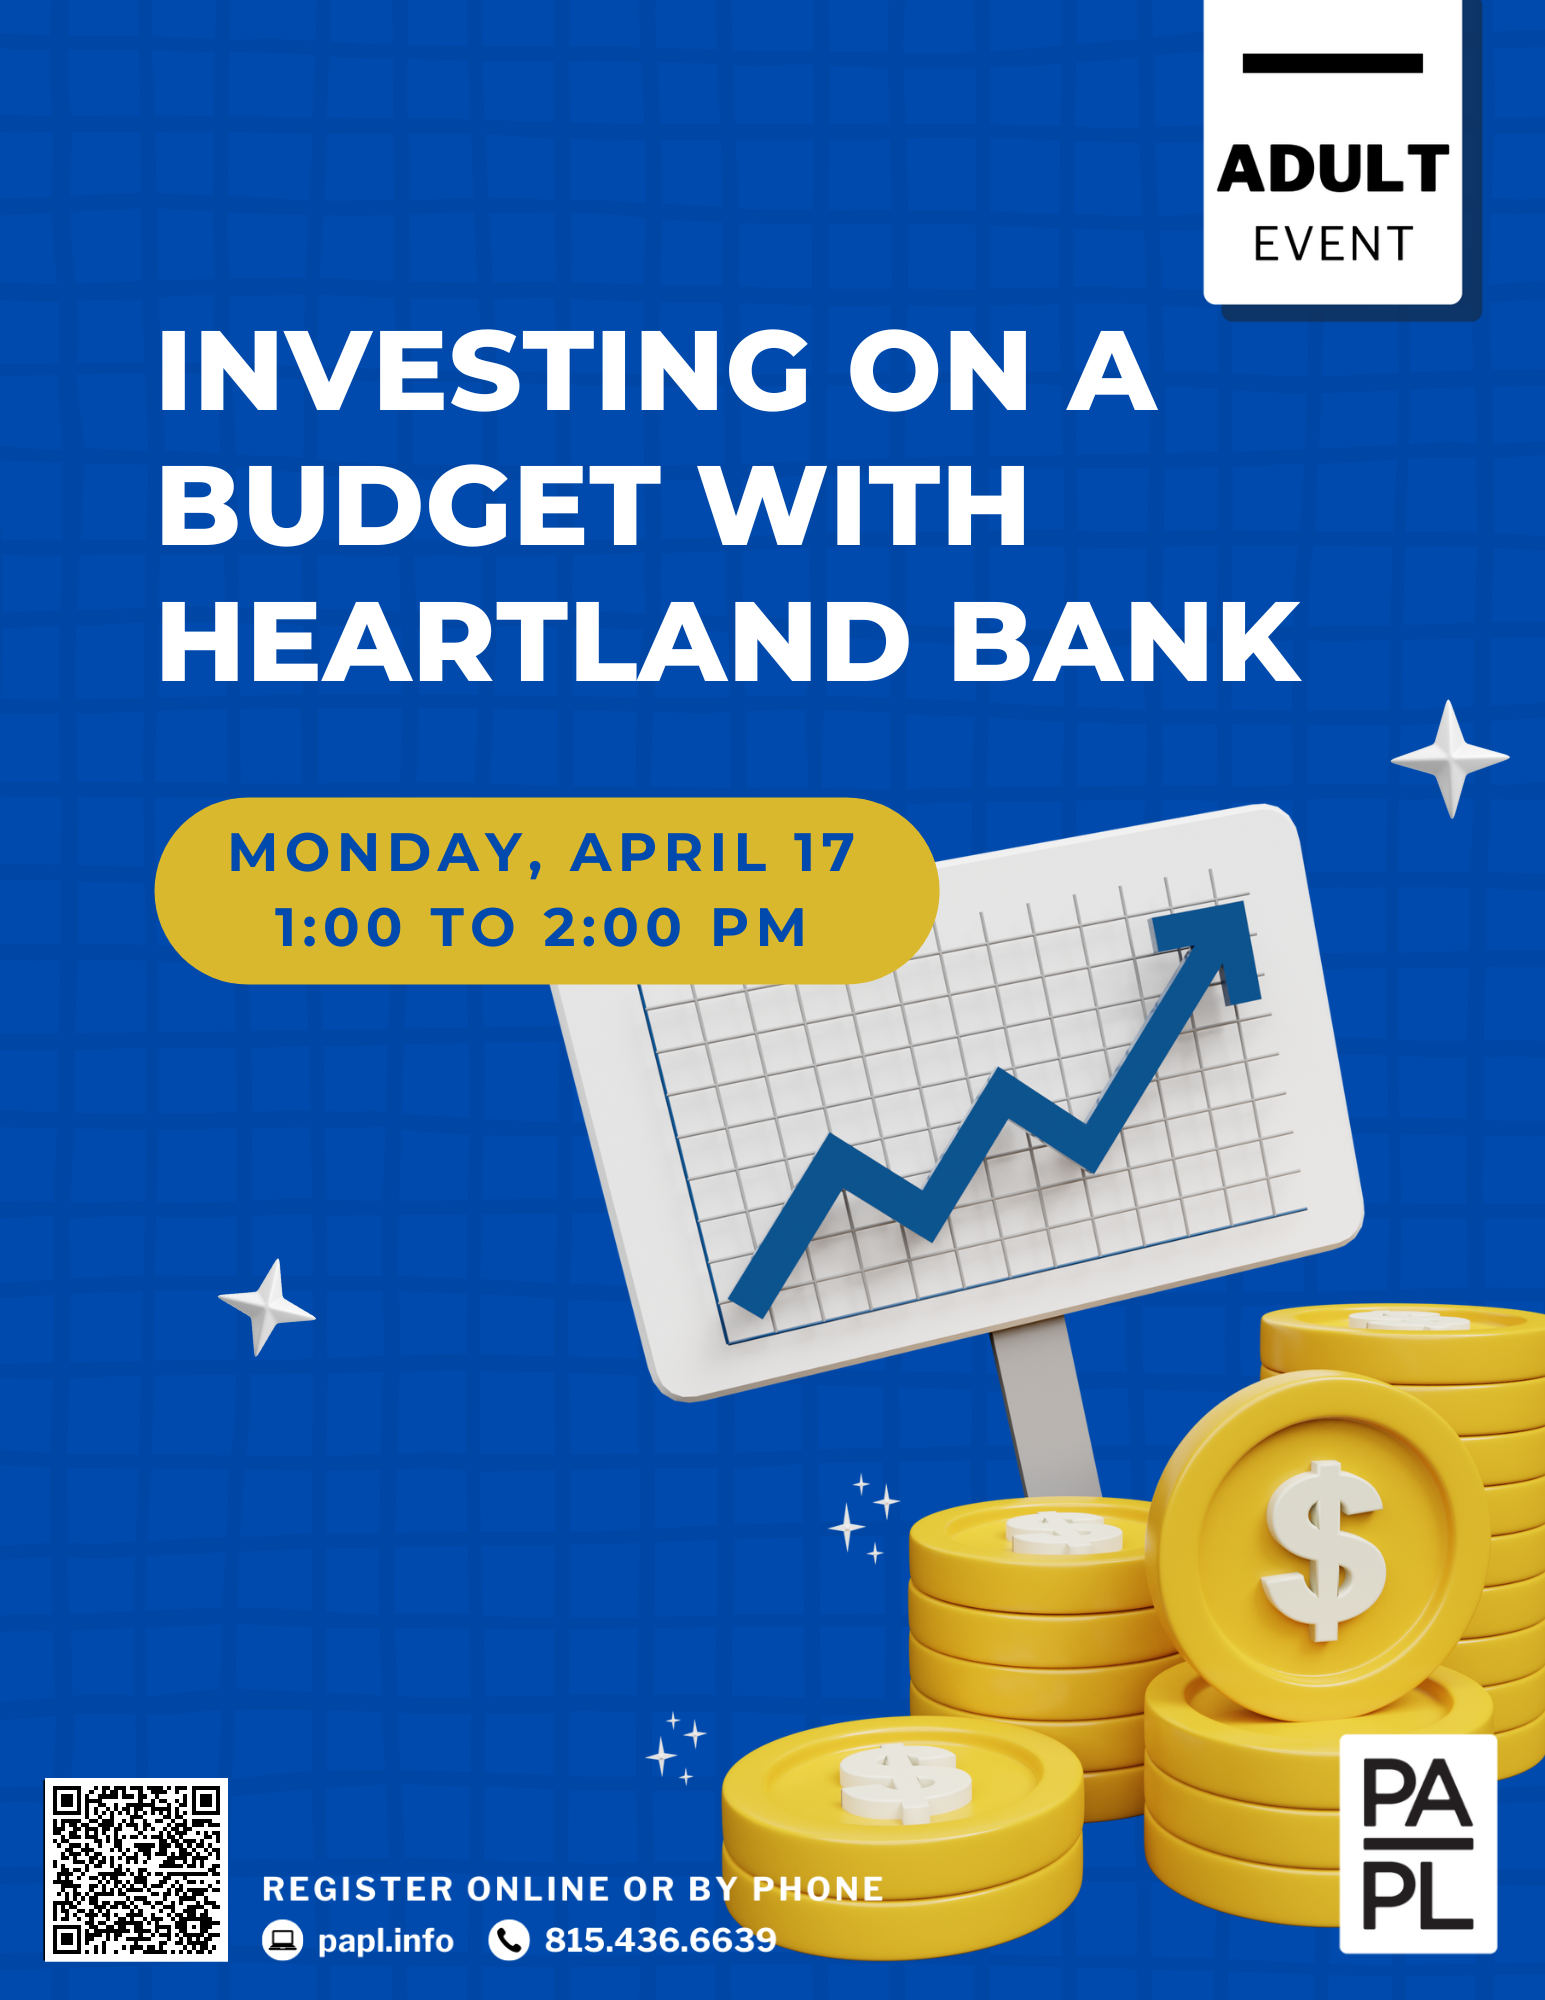 Investing on a Budget with Heartland Bank